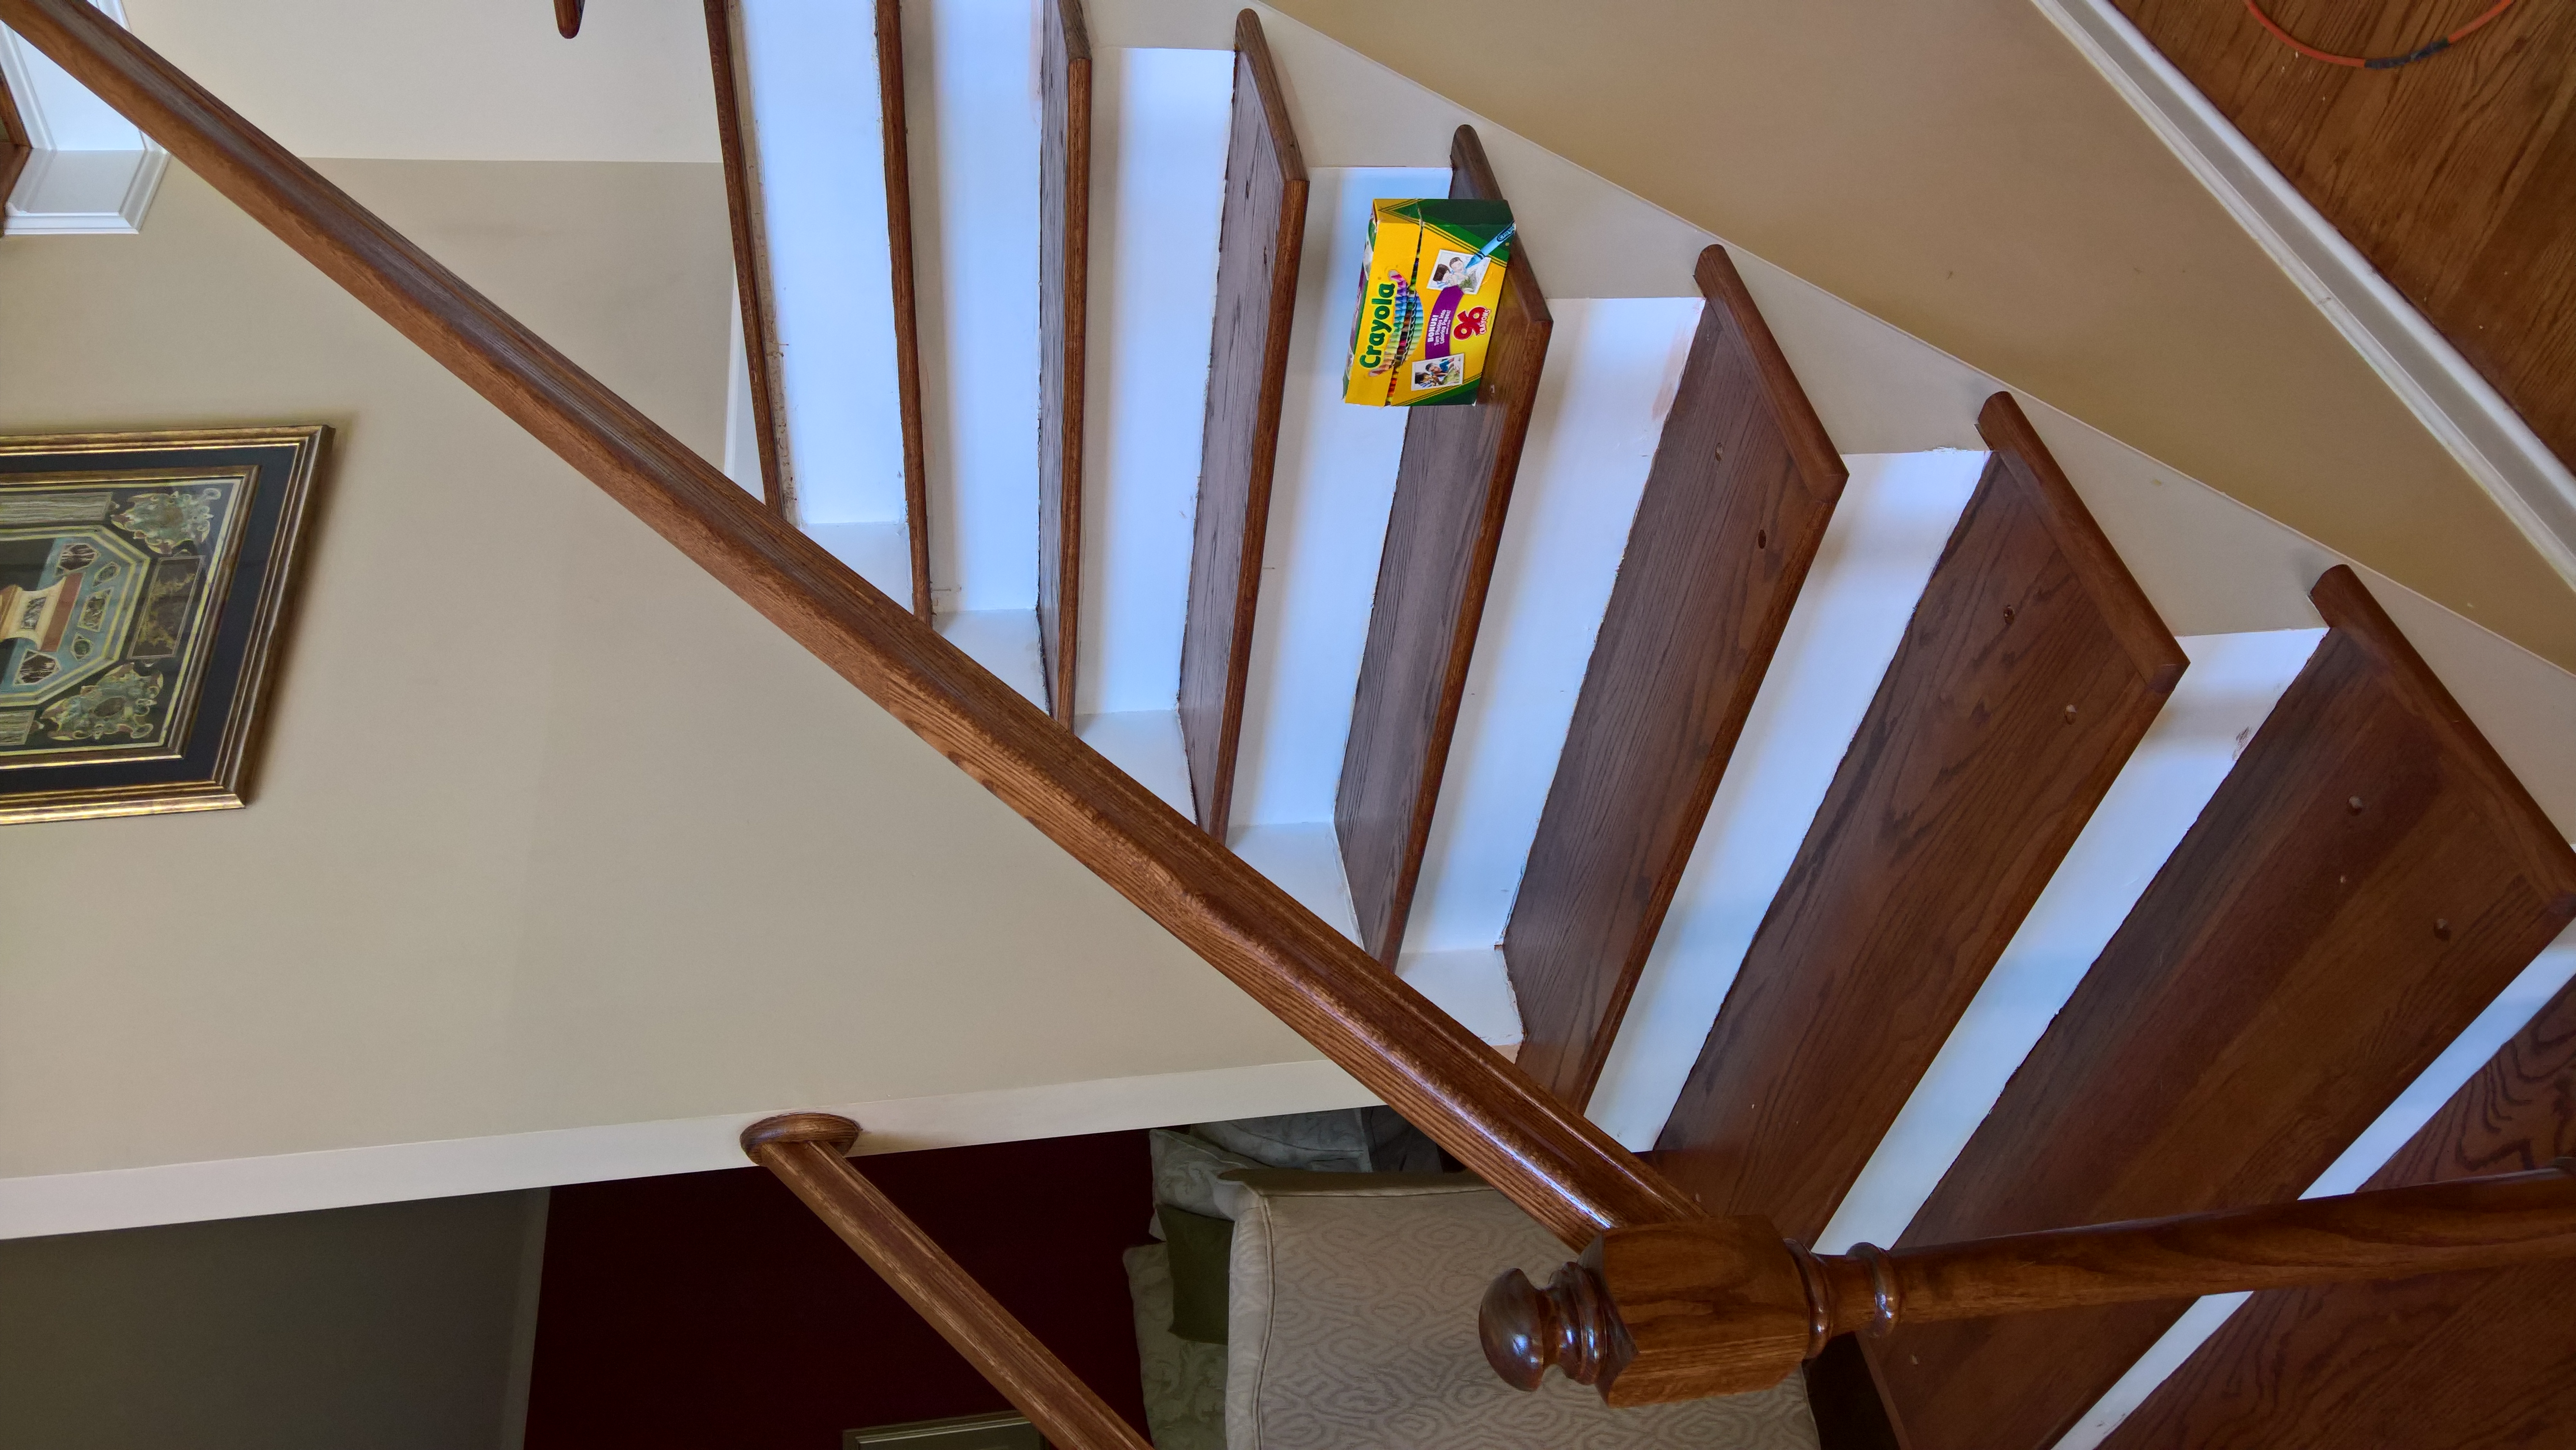 No balusters on the stairs